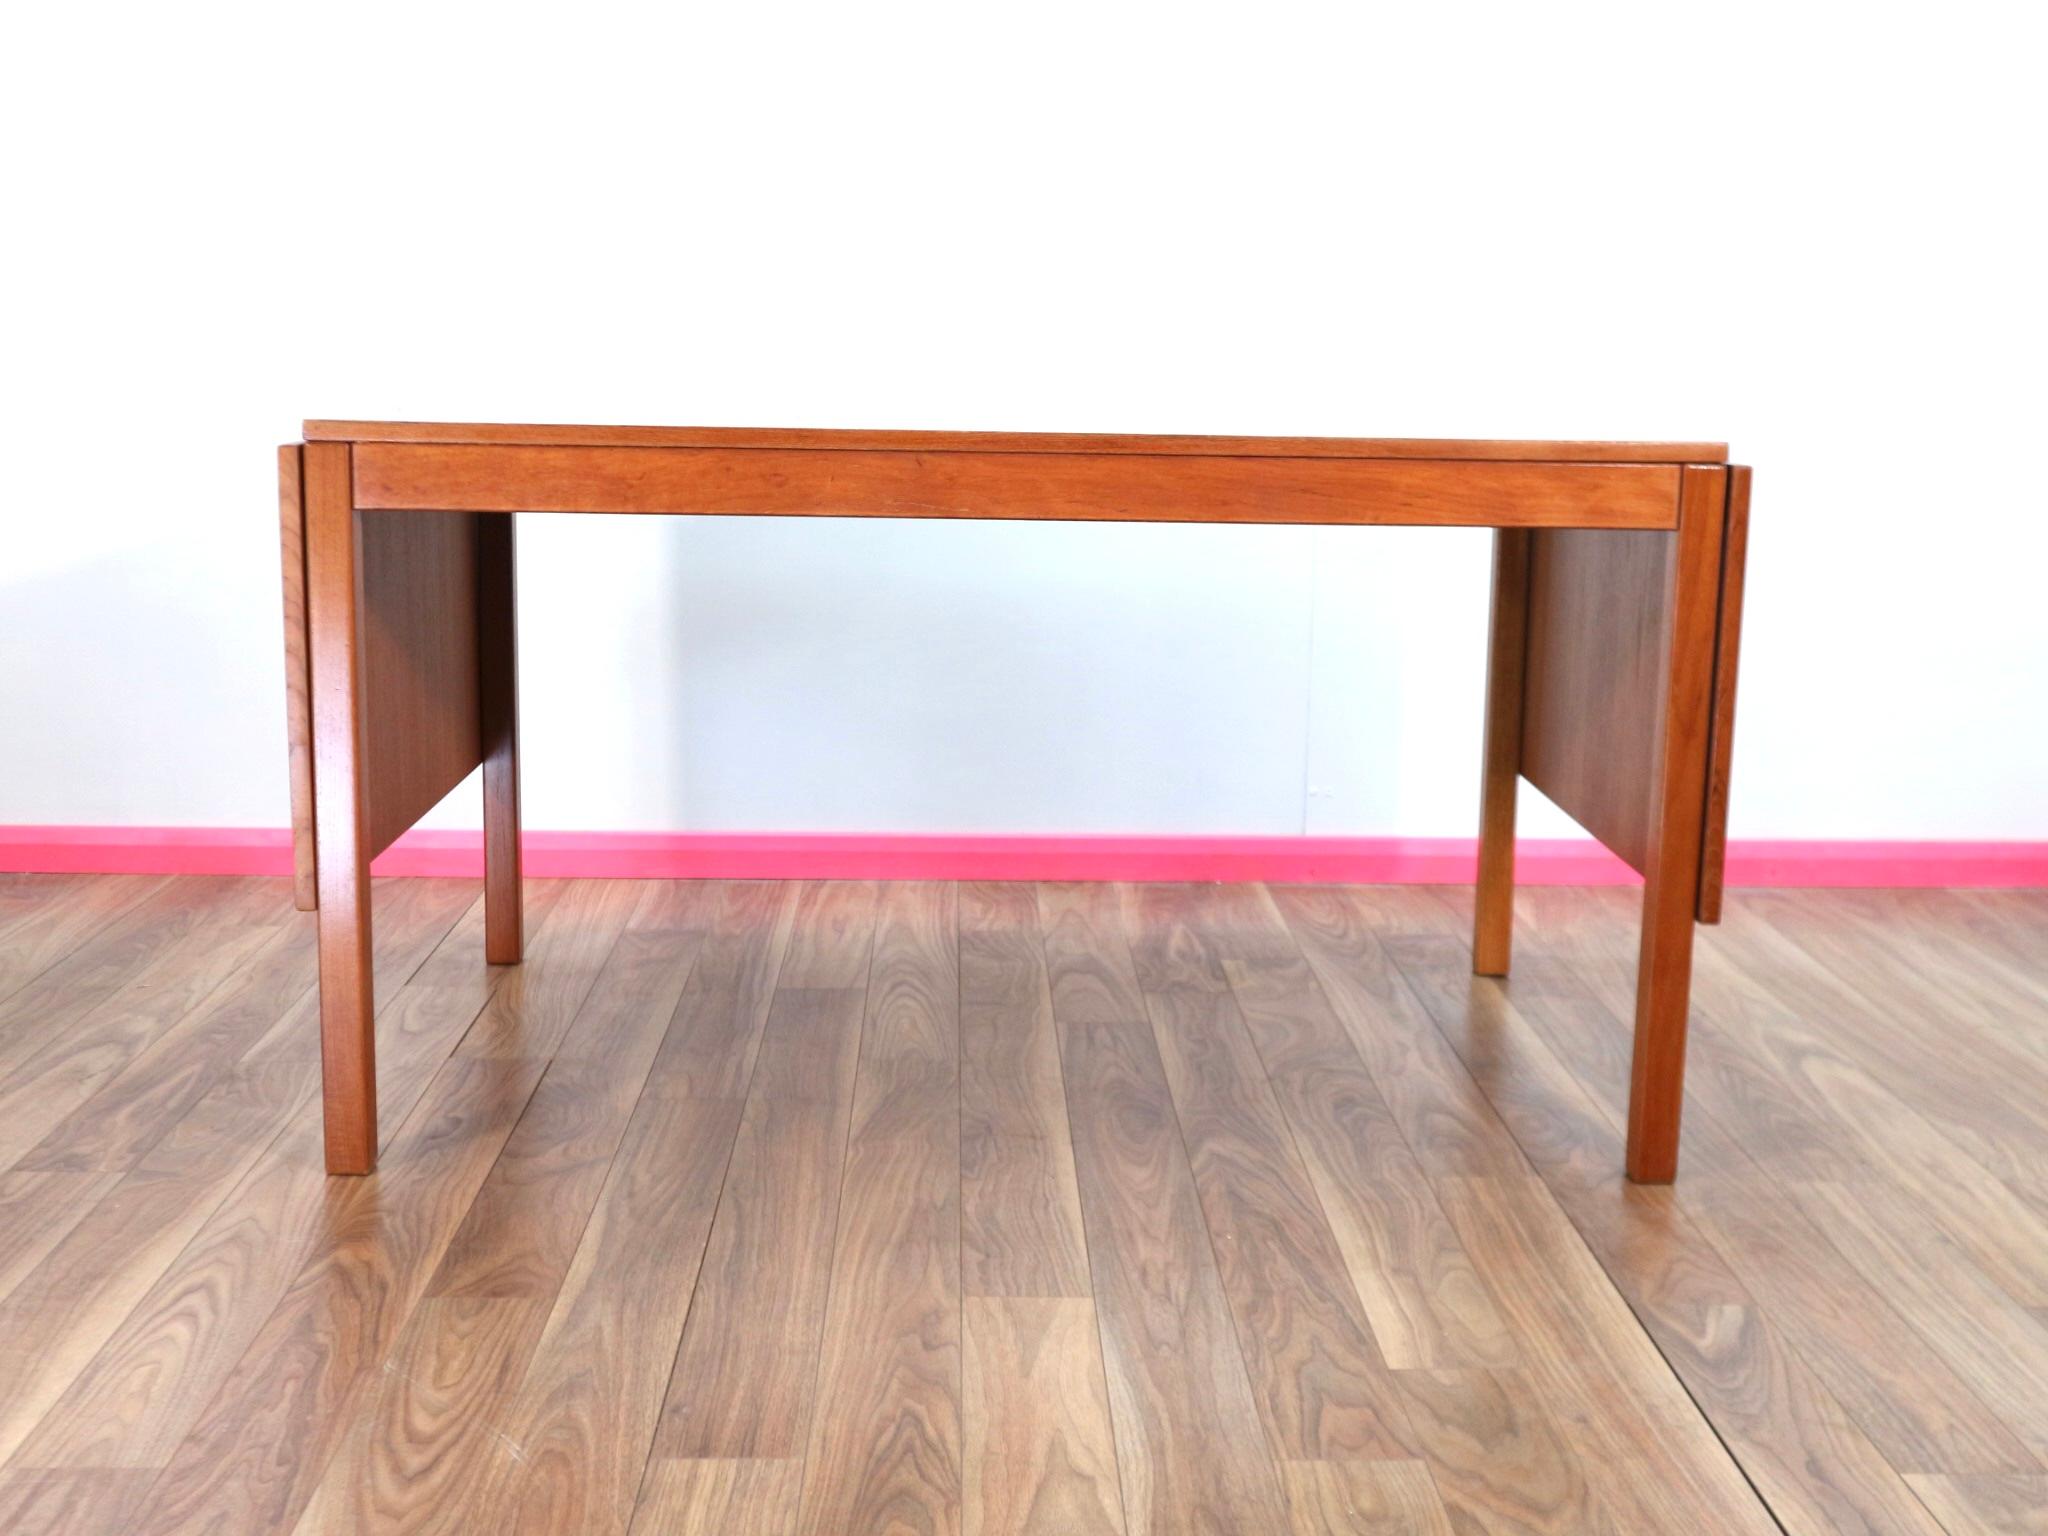 A stunning piece of Danish mid-century design furniture. Designed Vejle Stole. Makers mark stamped. 
A very versatile dining table that drops down to for compact spaces, and can be extended for your big mid-century Christmas dinner. 
The leaves